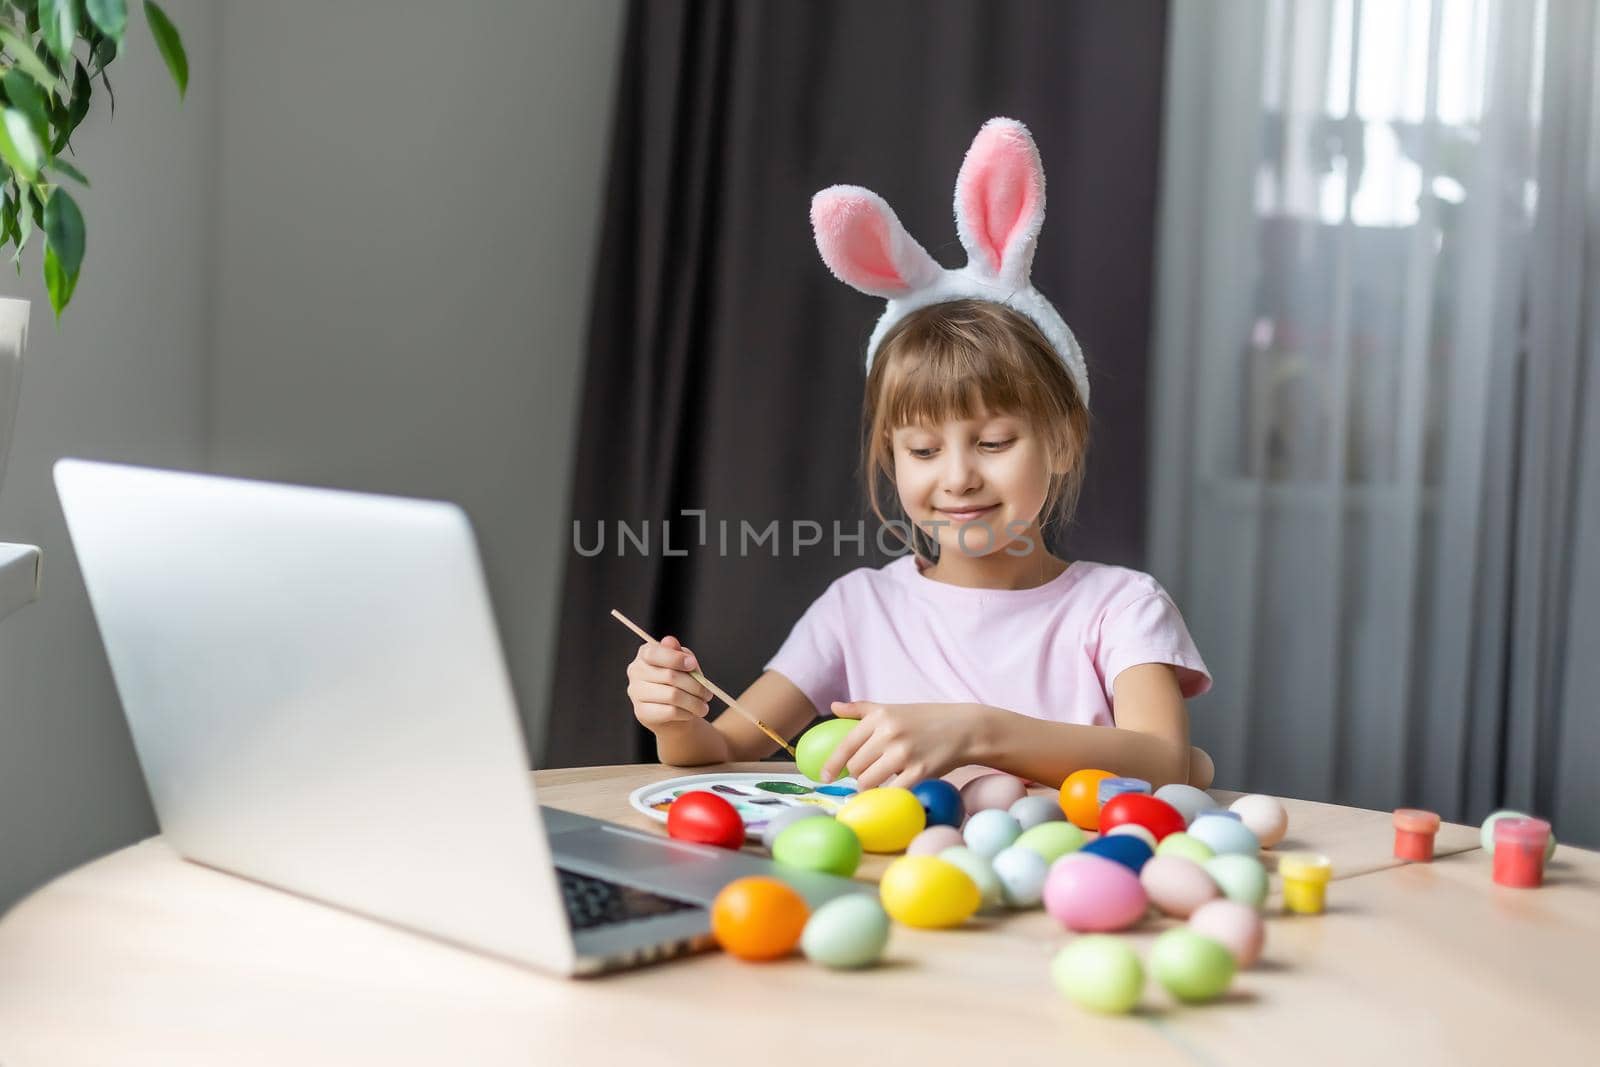 Little girl with her bunny using computer together preparing for easter.